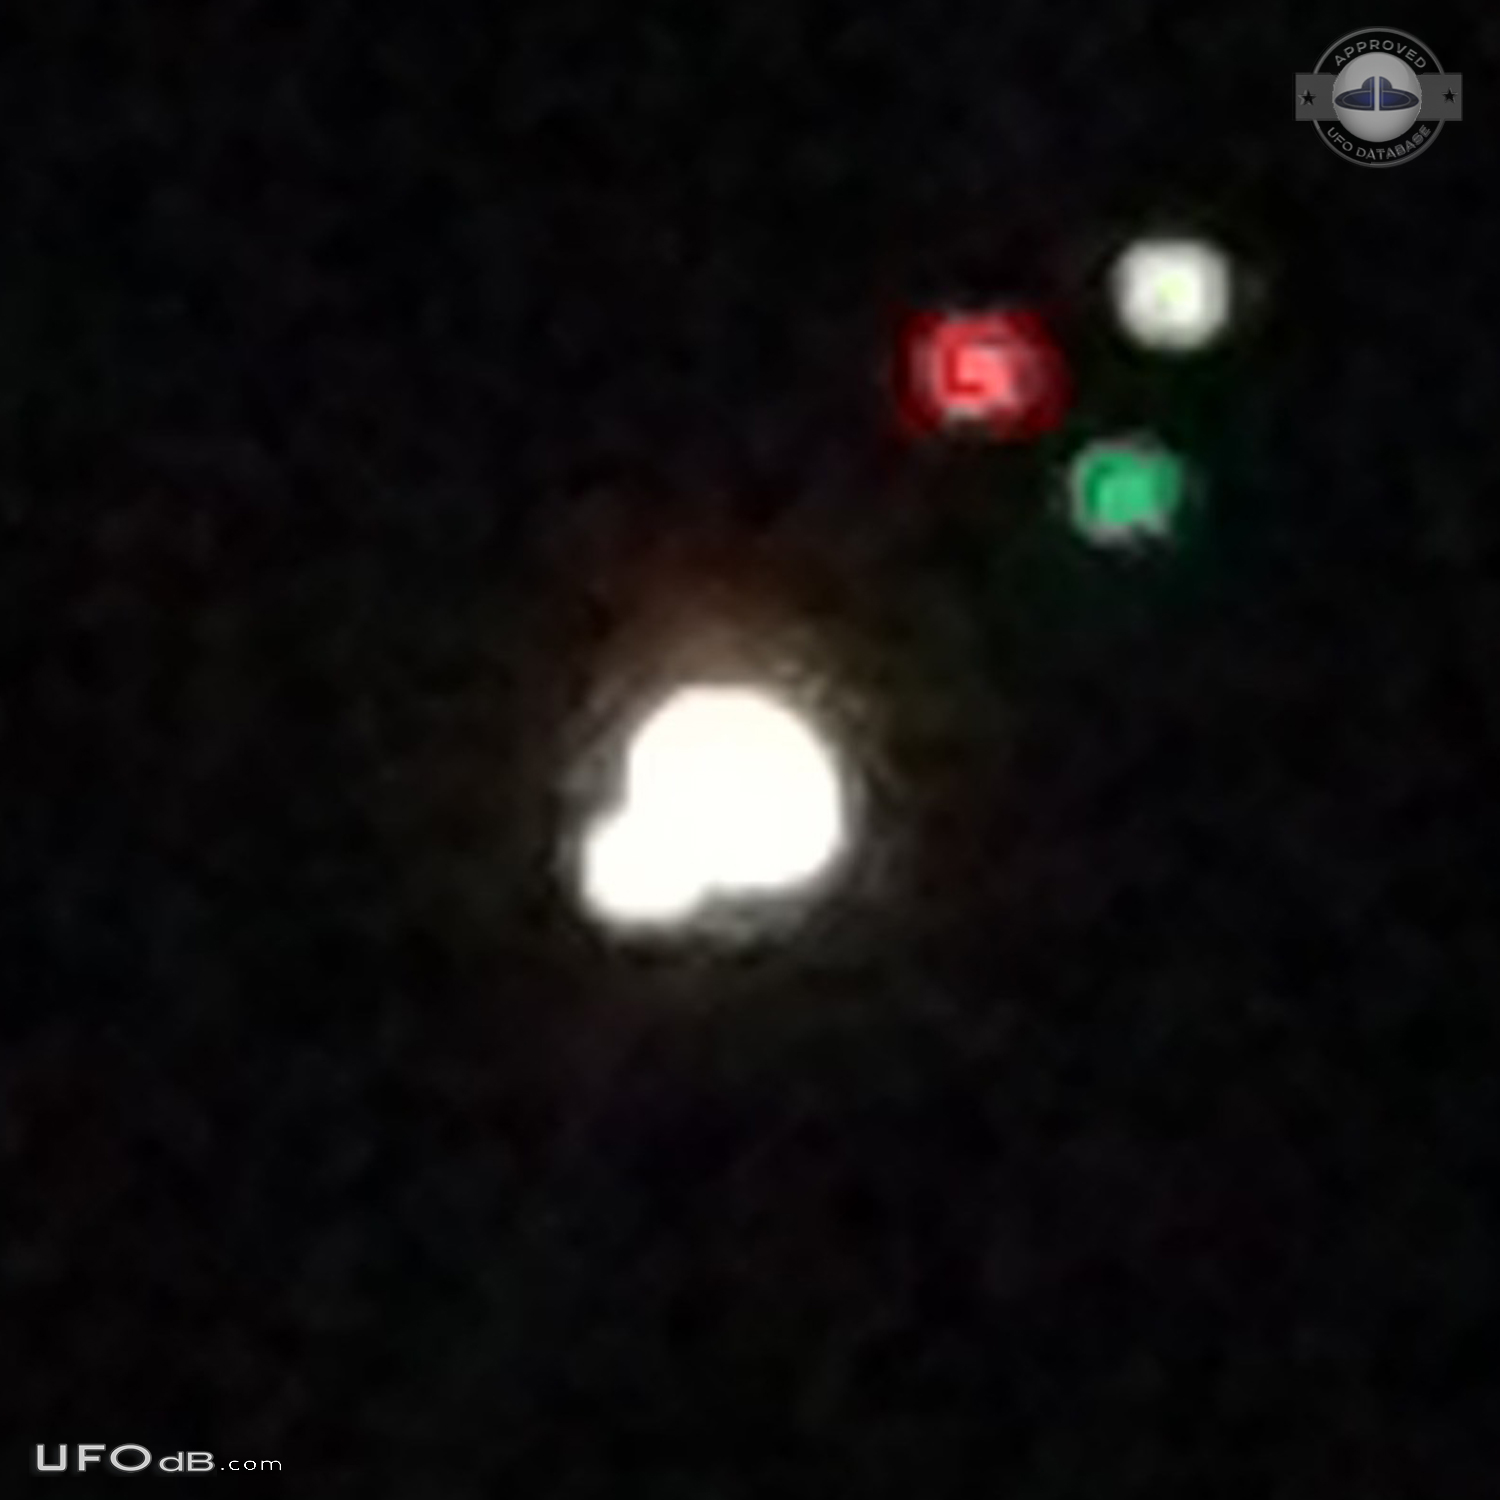 helicopter tractor beamed ufo and both flew off together - Las Vegas N UFO Picture #754-2